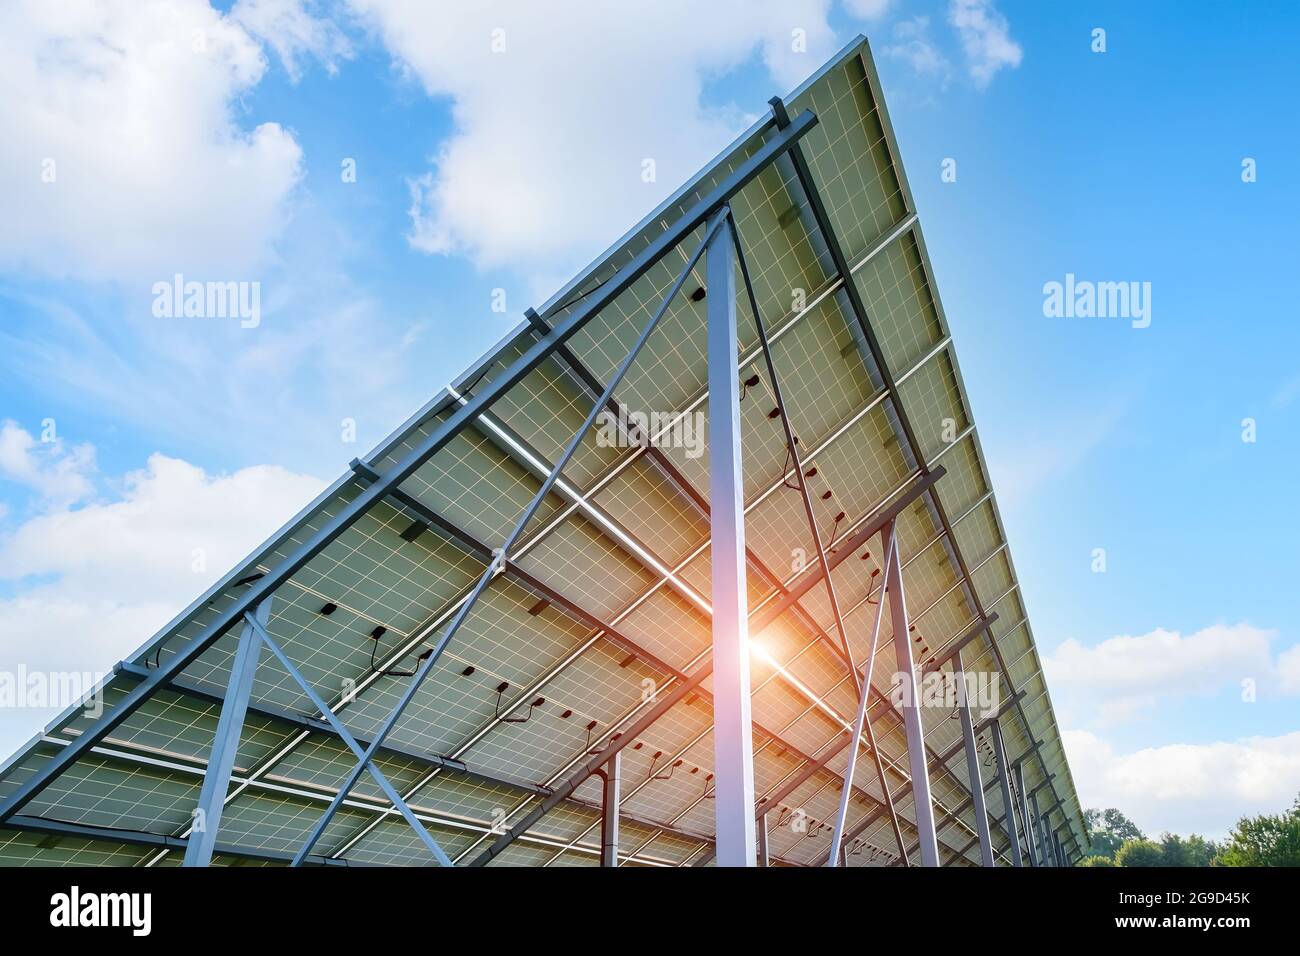 Canopy in the backyard made of solar panels near private house Stock Photo